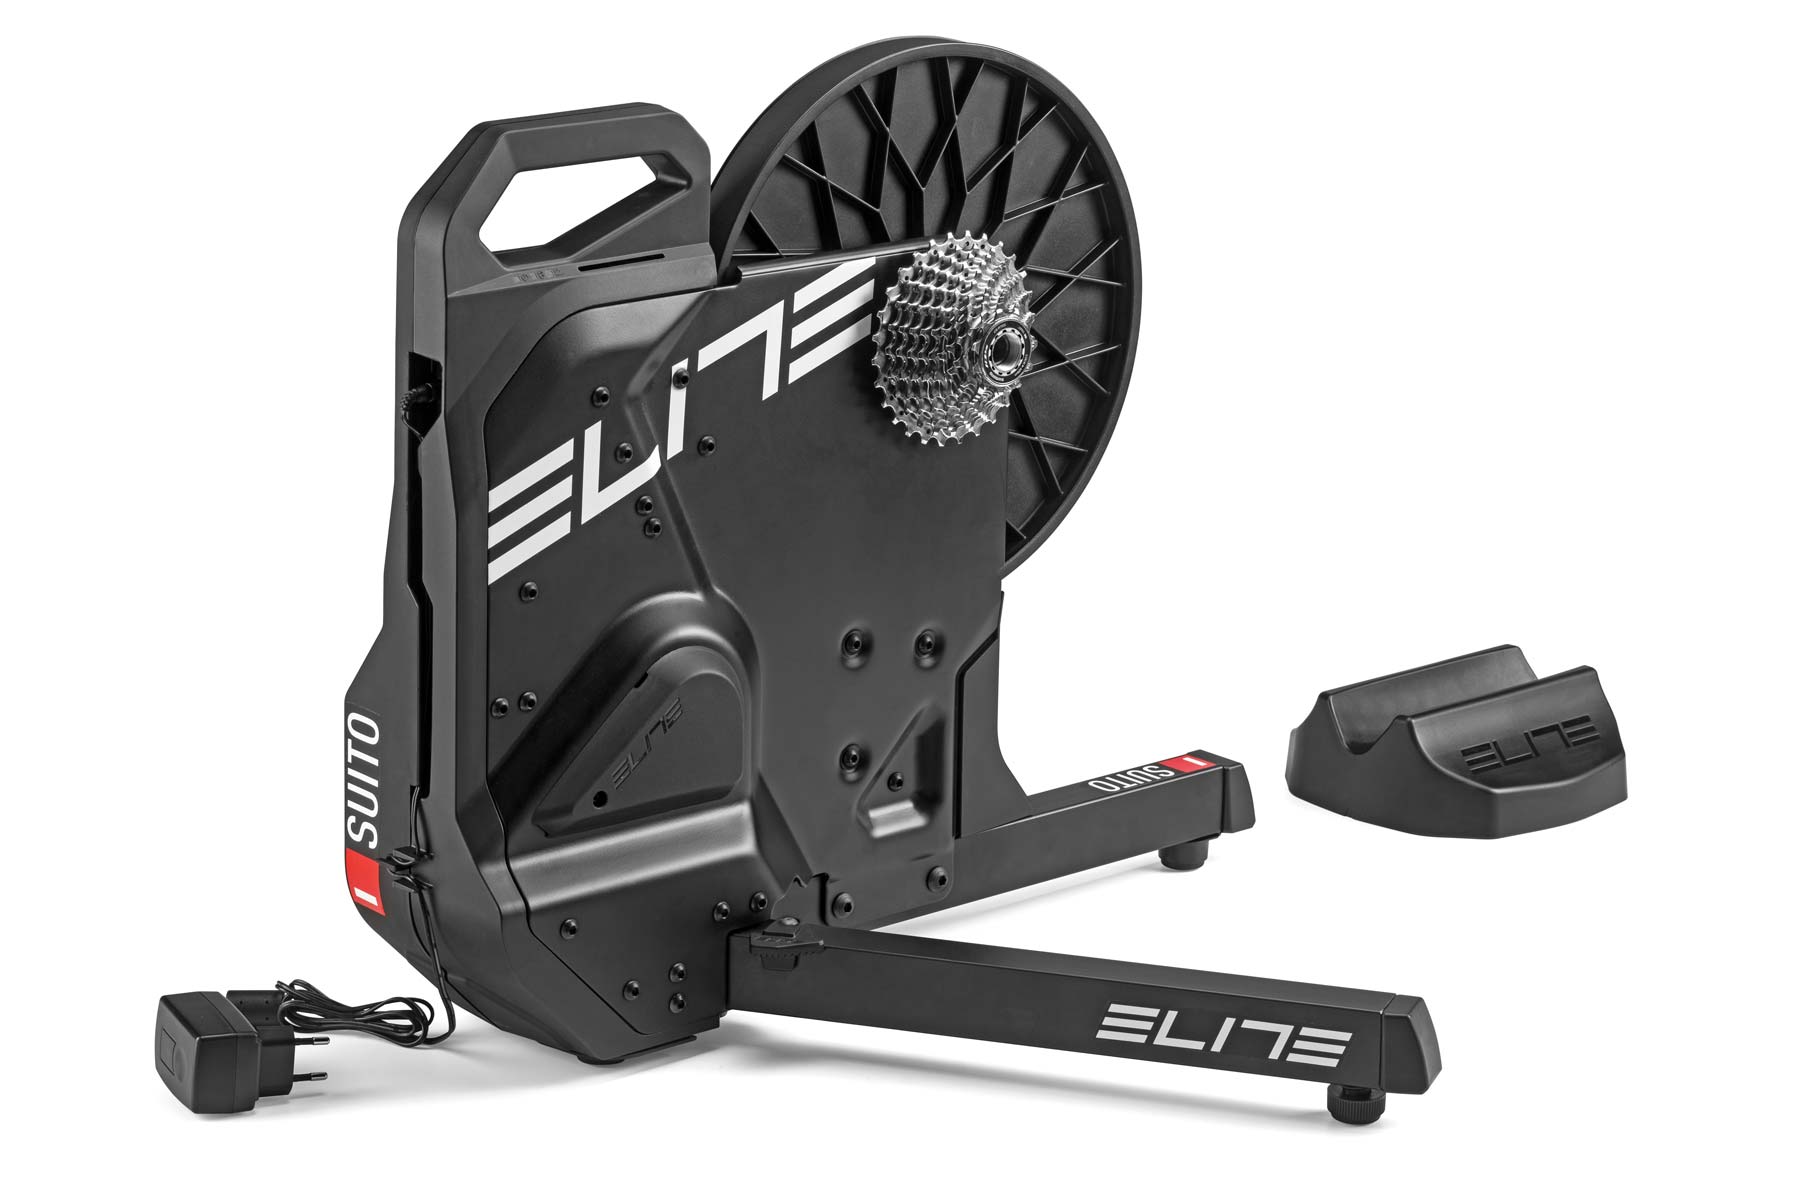 Elite Suito direct drive smart trainer,easy-setup compact magnetic resistance interactive smart indoor cycling trainer